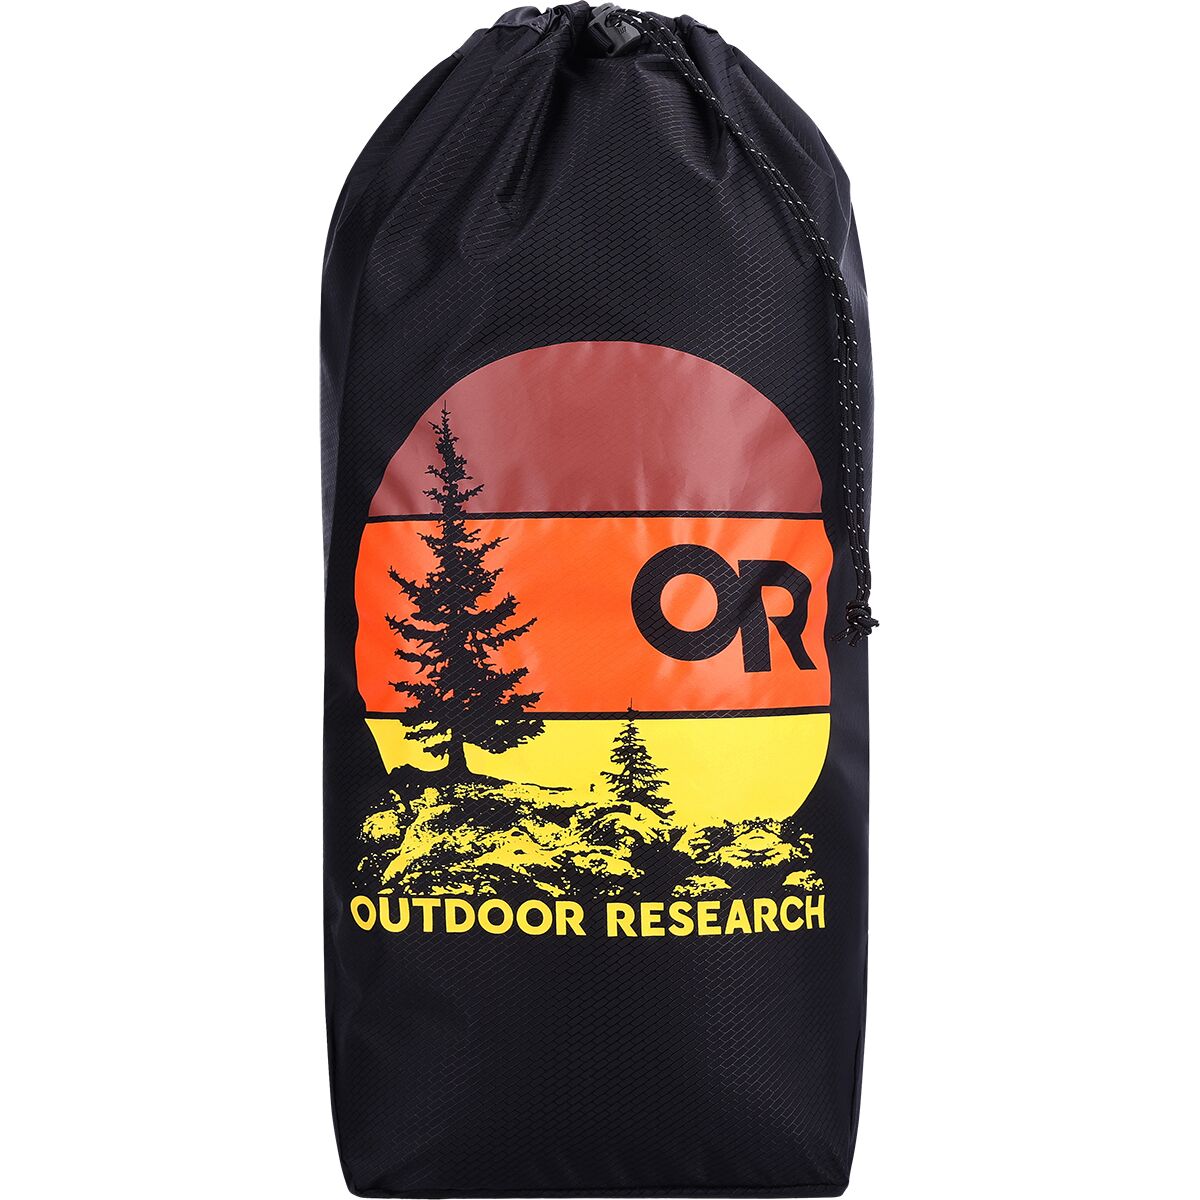 Outdoor Research PackOut Graphic 10L Stuff Sack